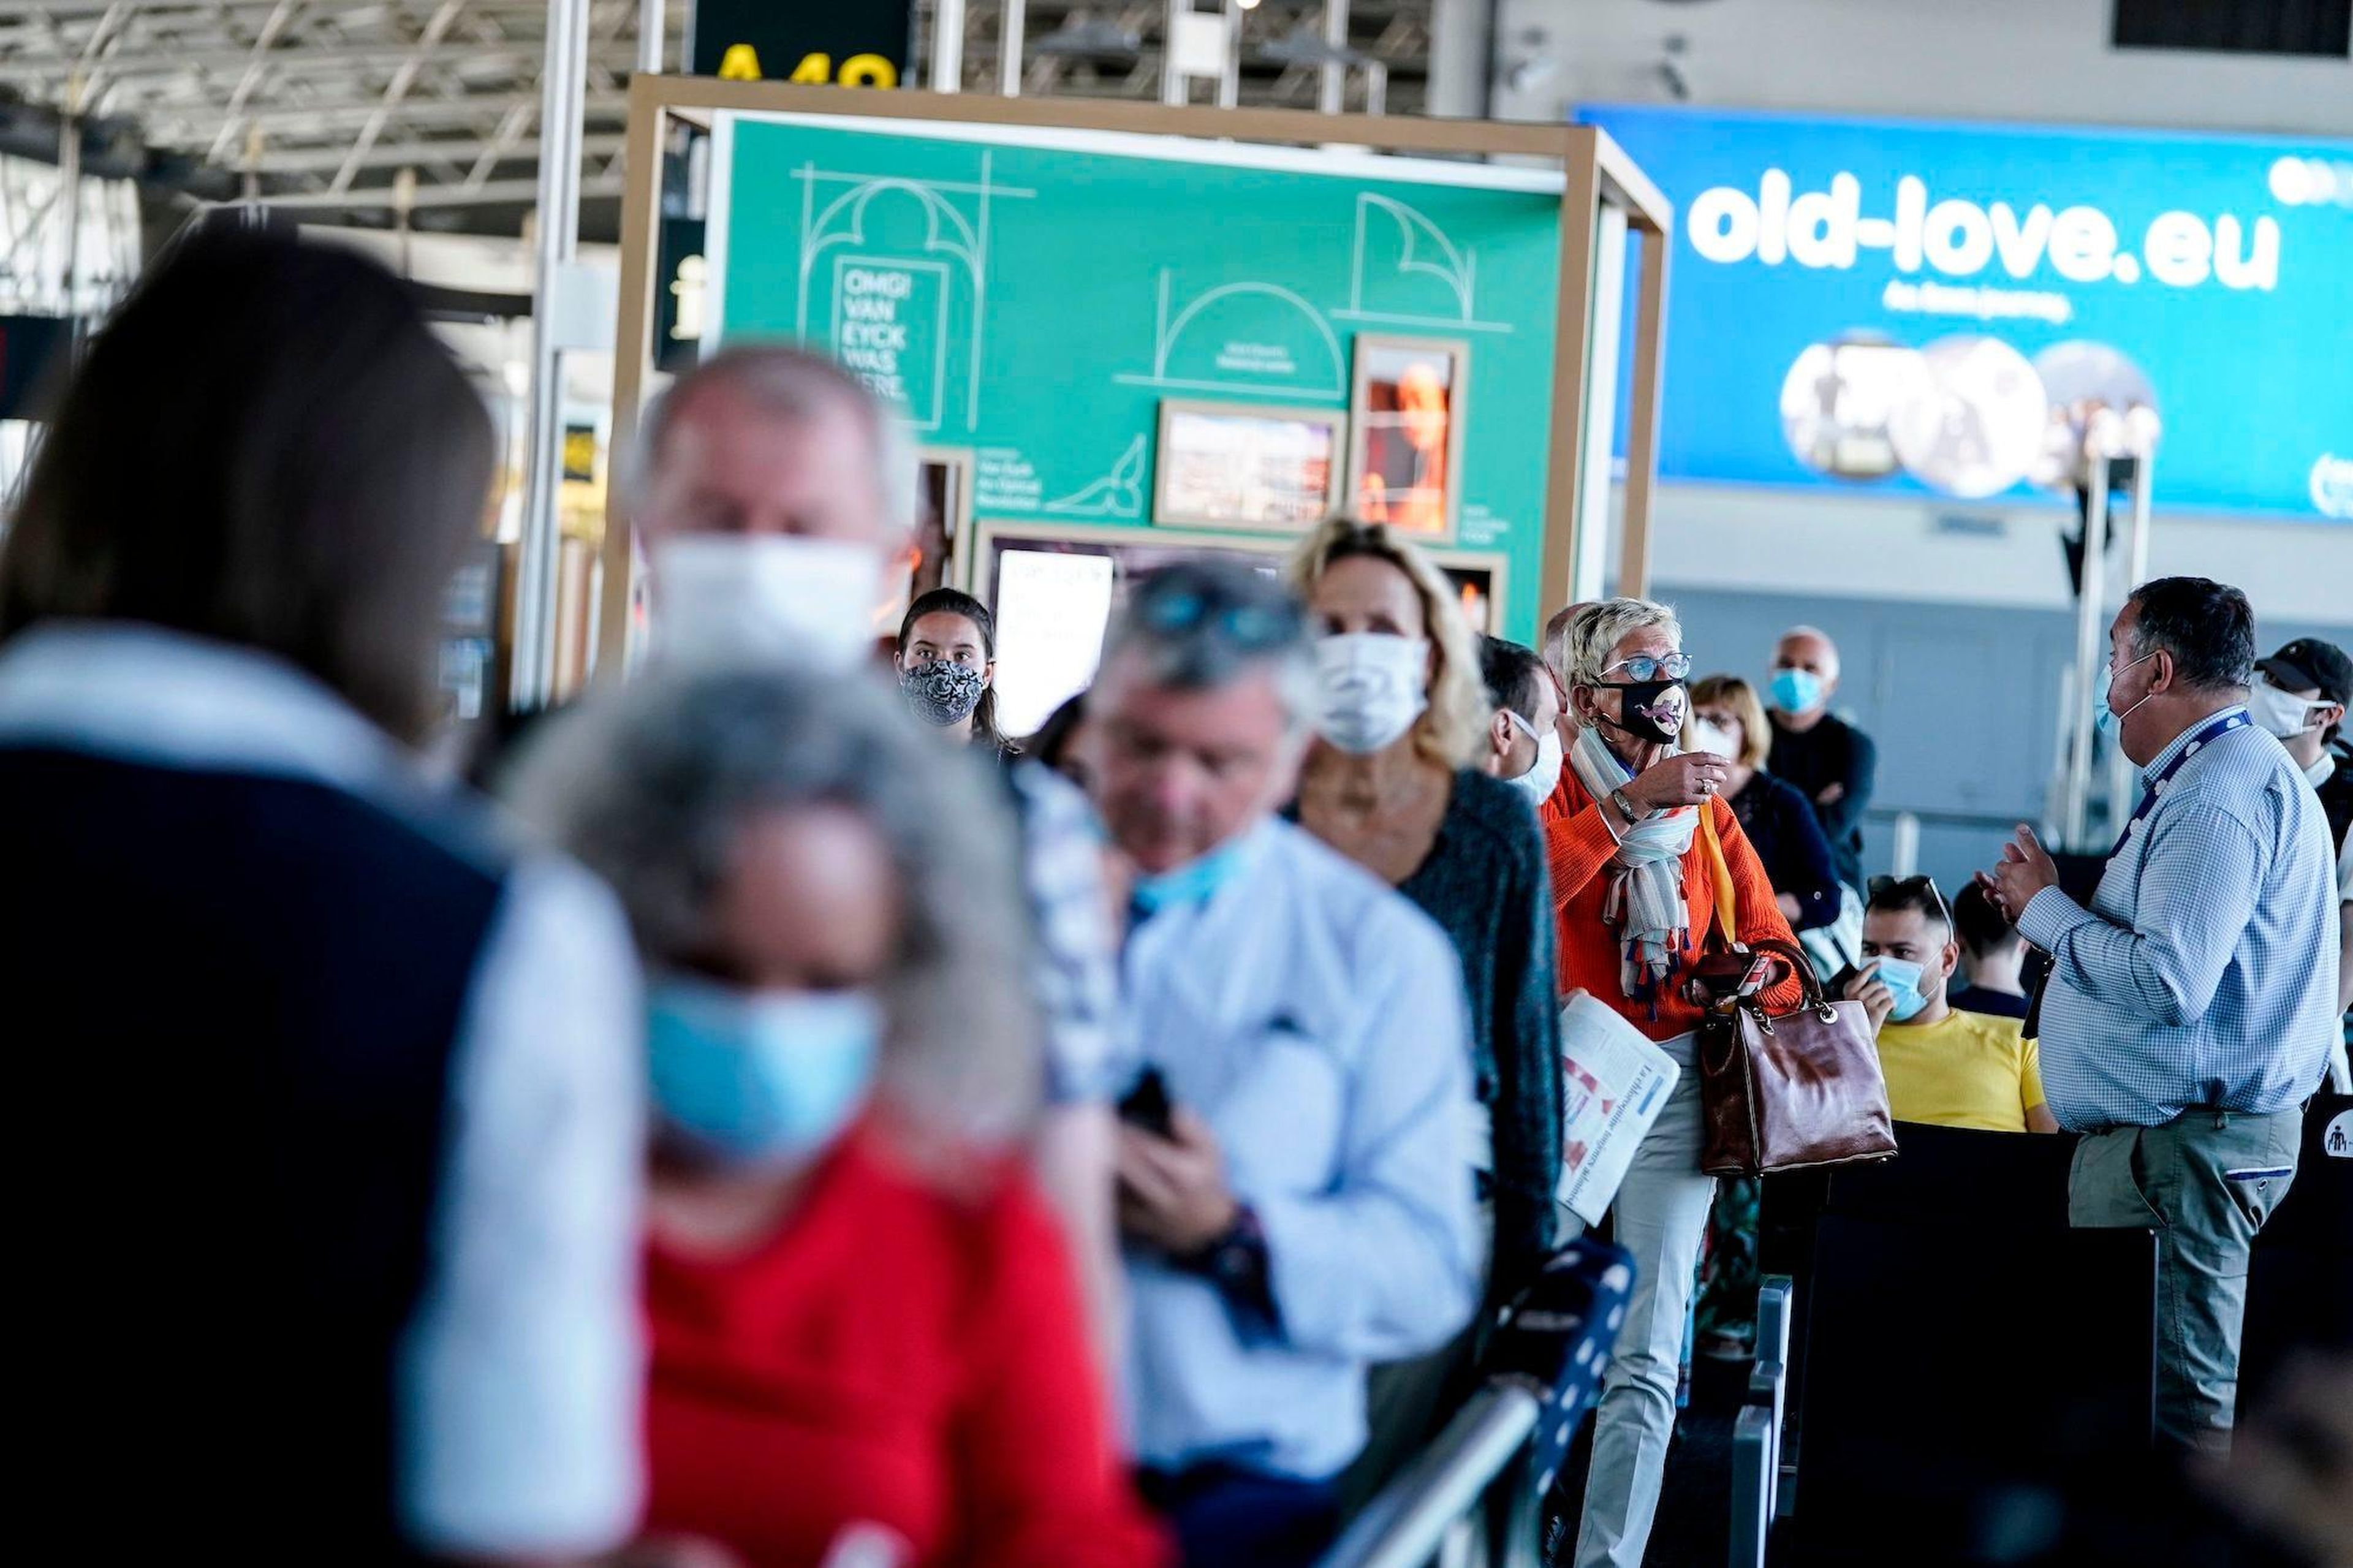 Passengers queue at the boarding gate at Brussels Airport, in Zaventem, on June 15, 2020 as Brussels Airport reopens for travels within Europe and the Schengen zone, after a months-long closure aimed at stemming the spread of the COVID-19 pandemic, caused